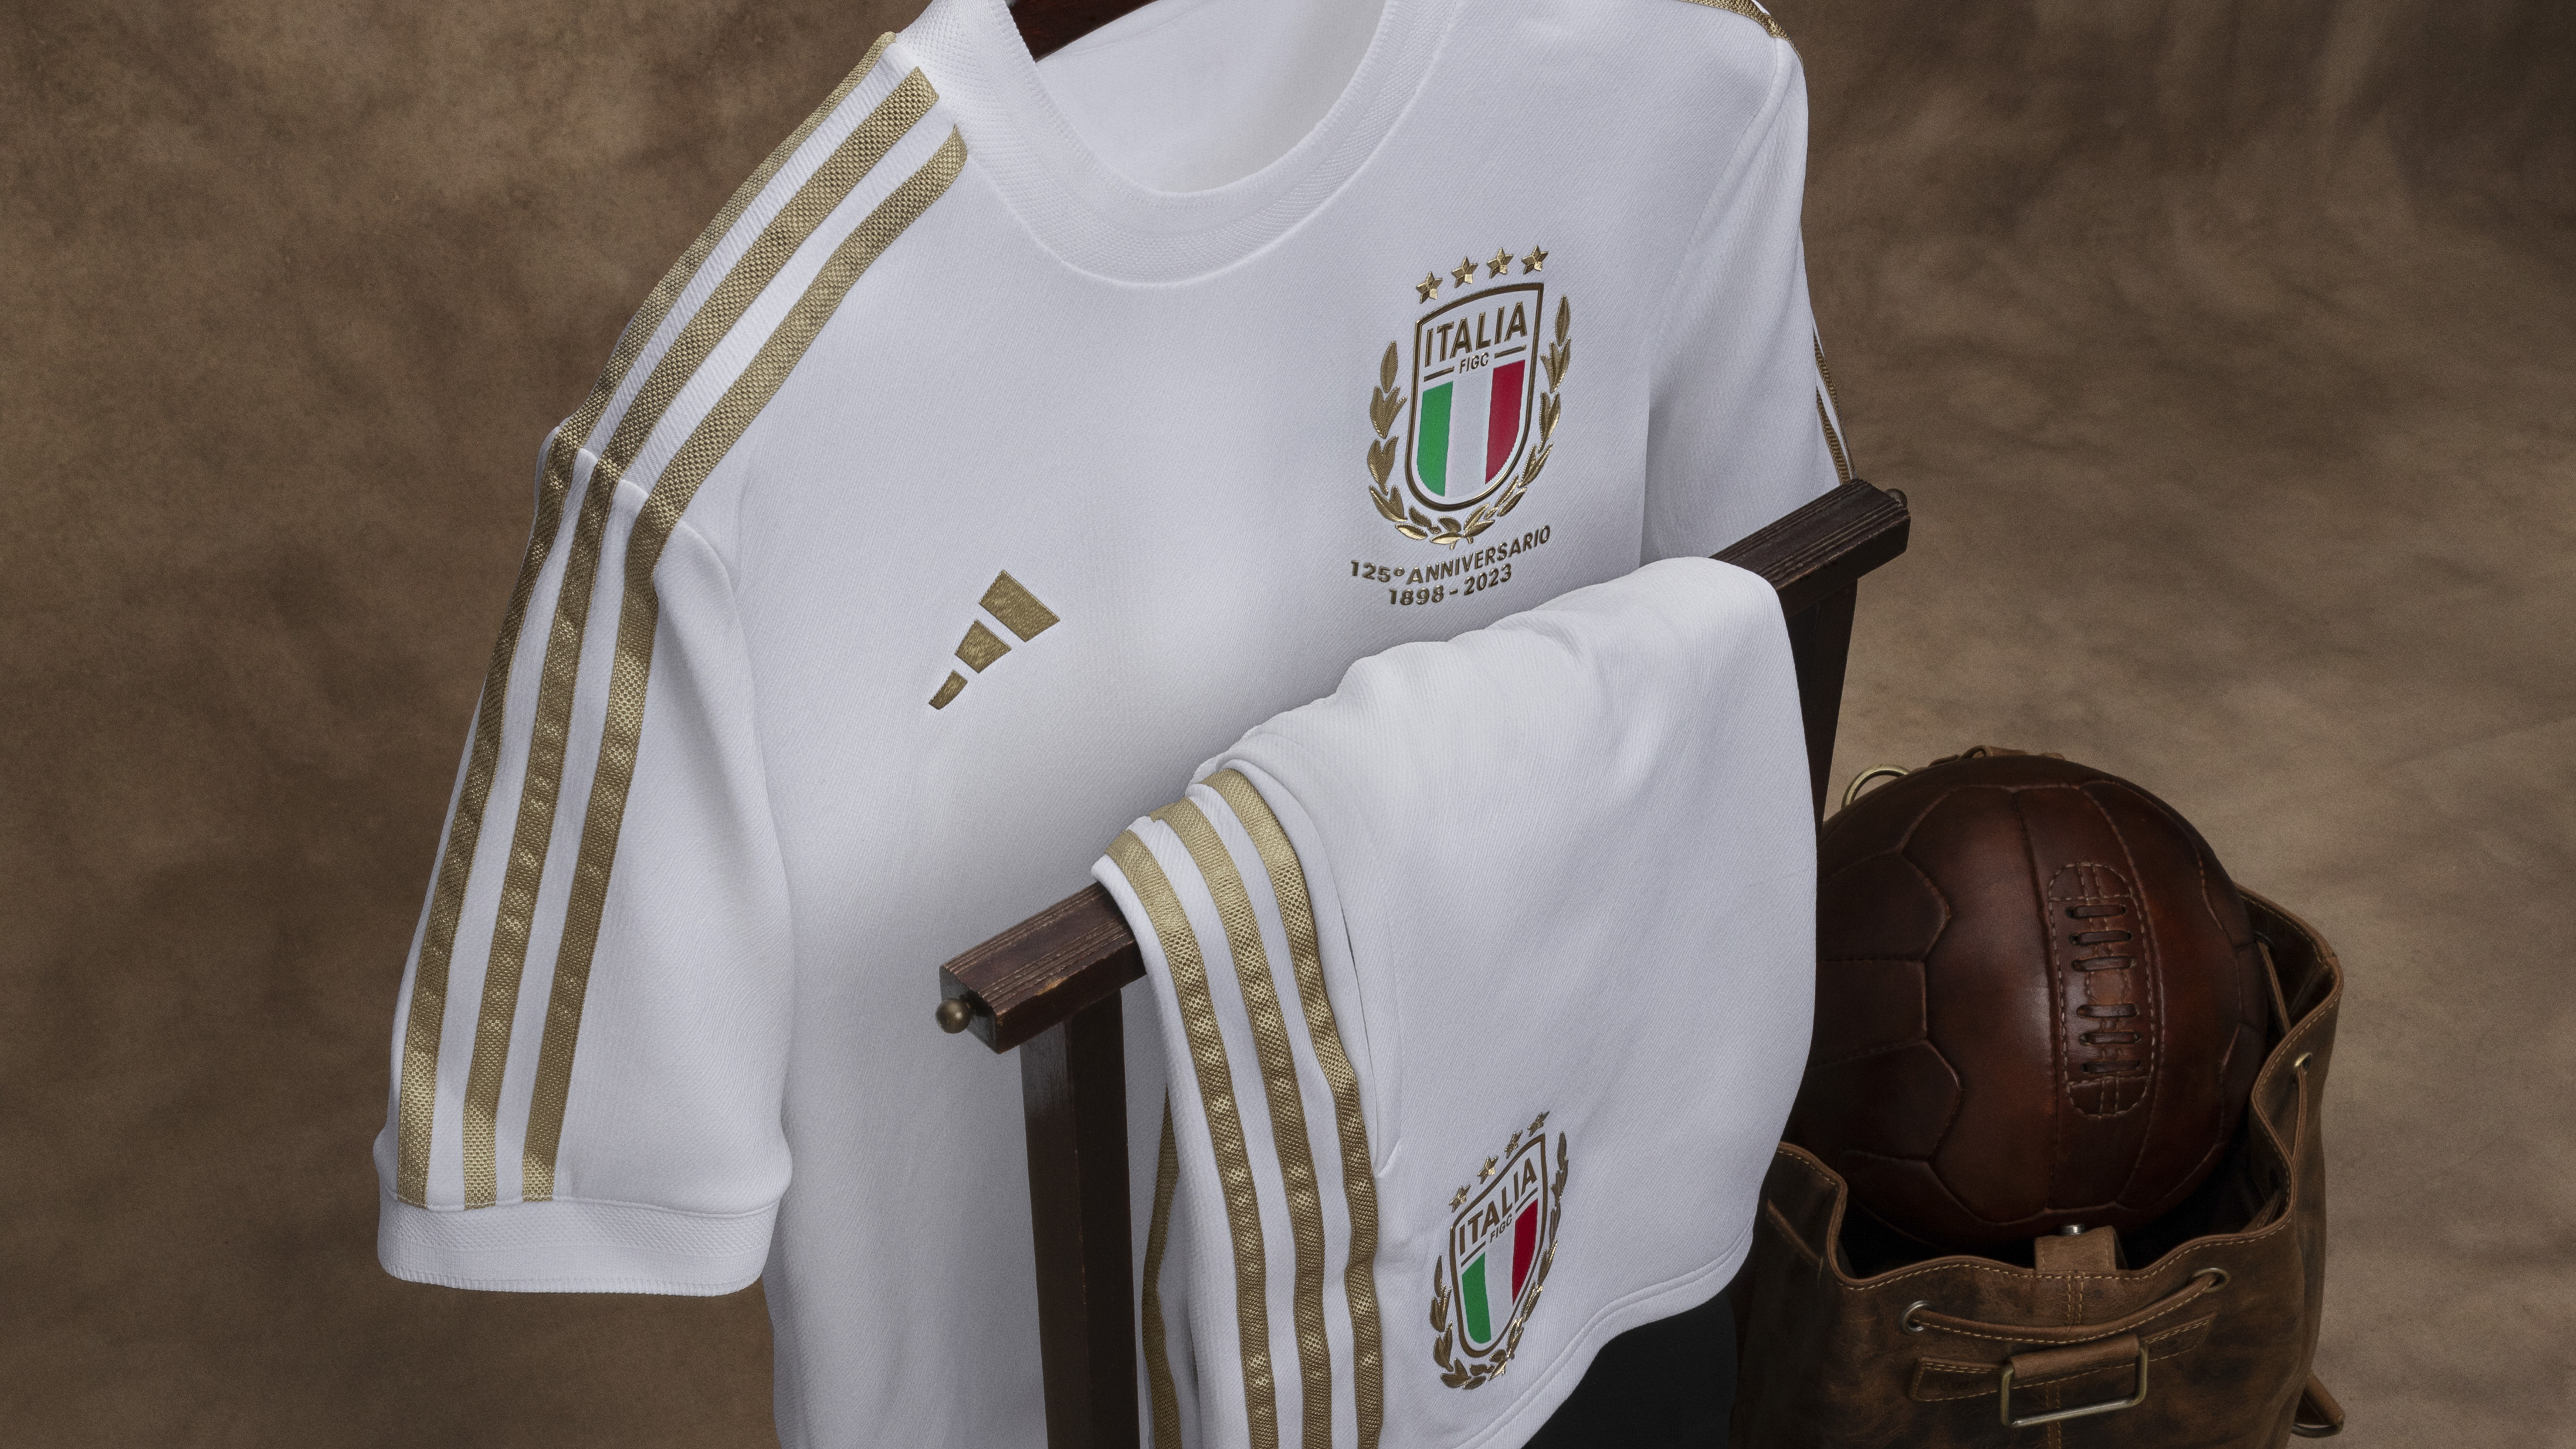 adidas celebrates 125th anniversary with special Nations League kit for the Azzurri | FIGC